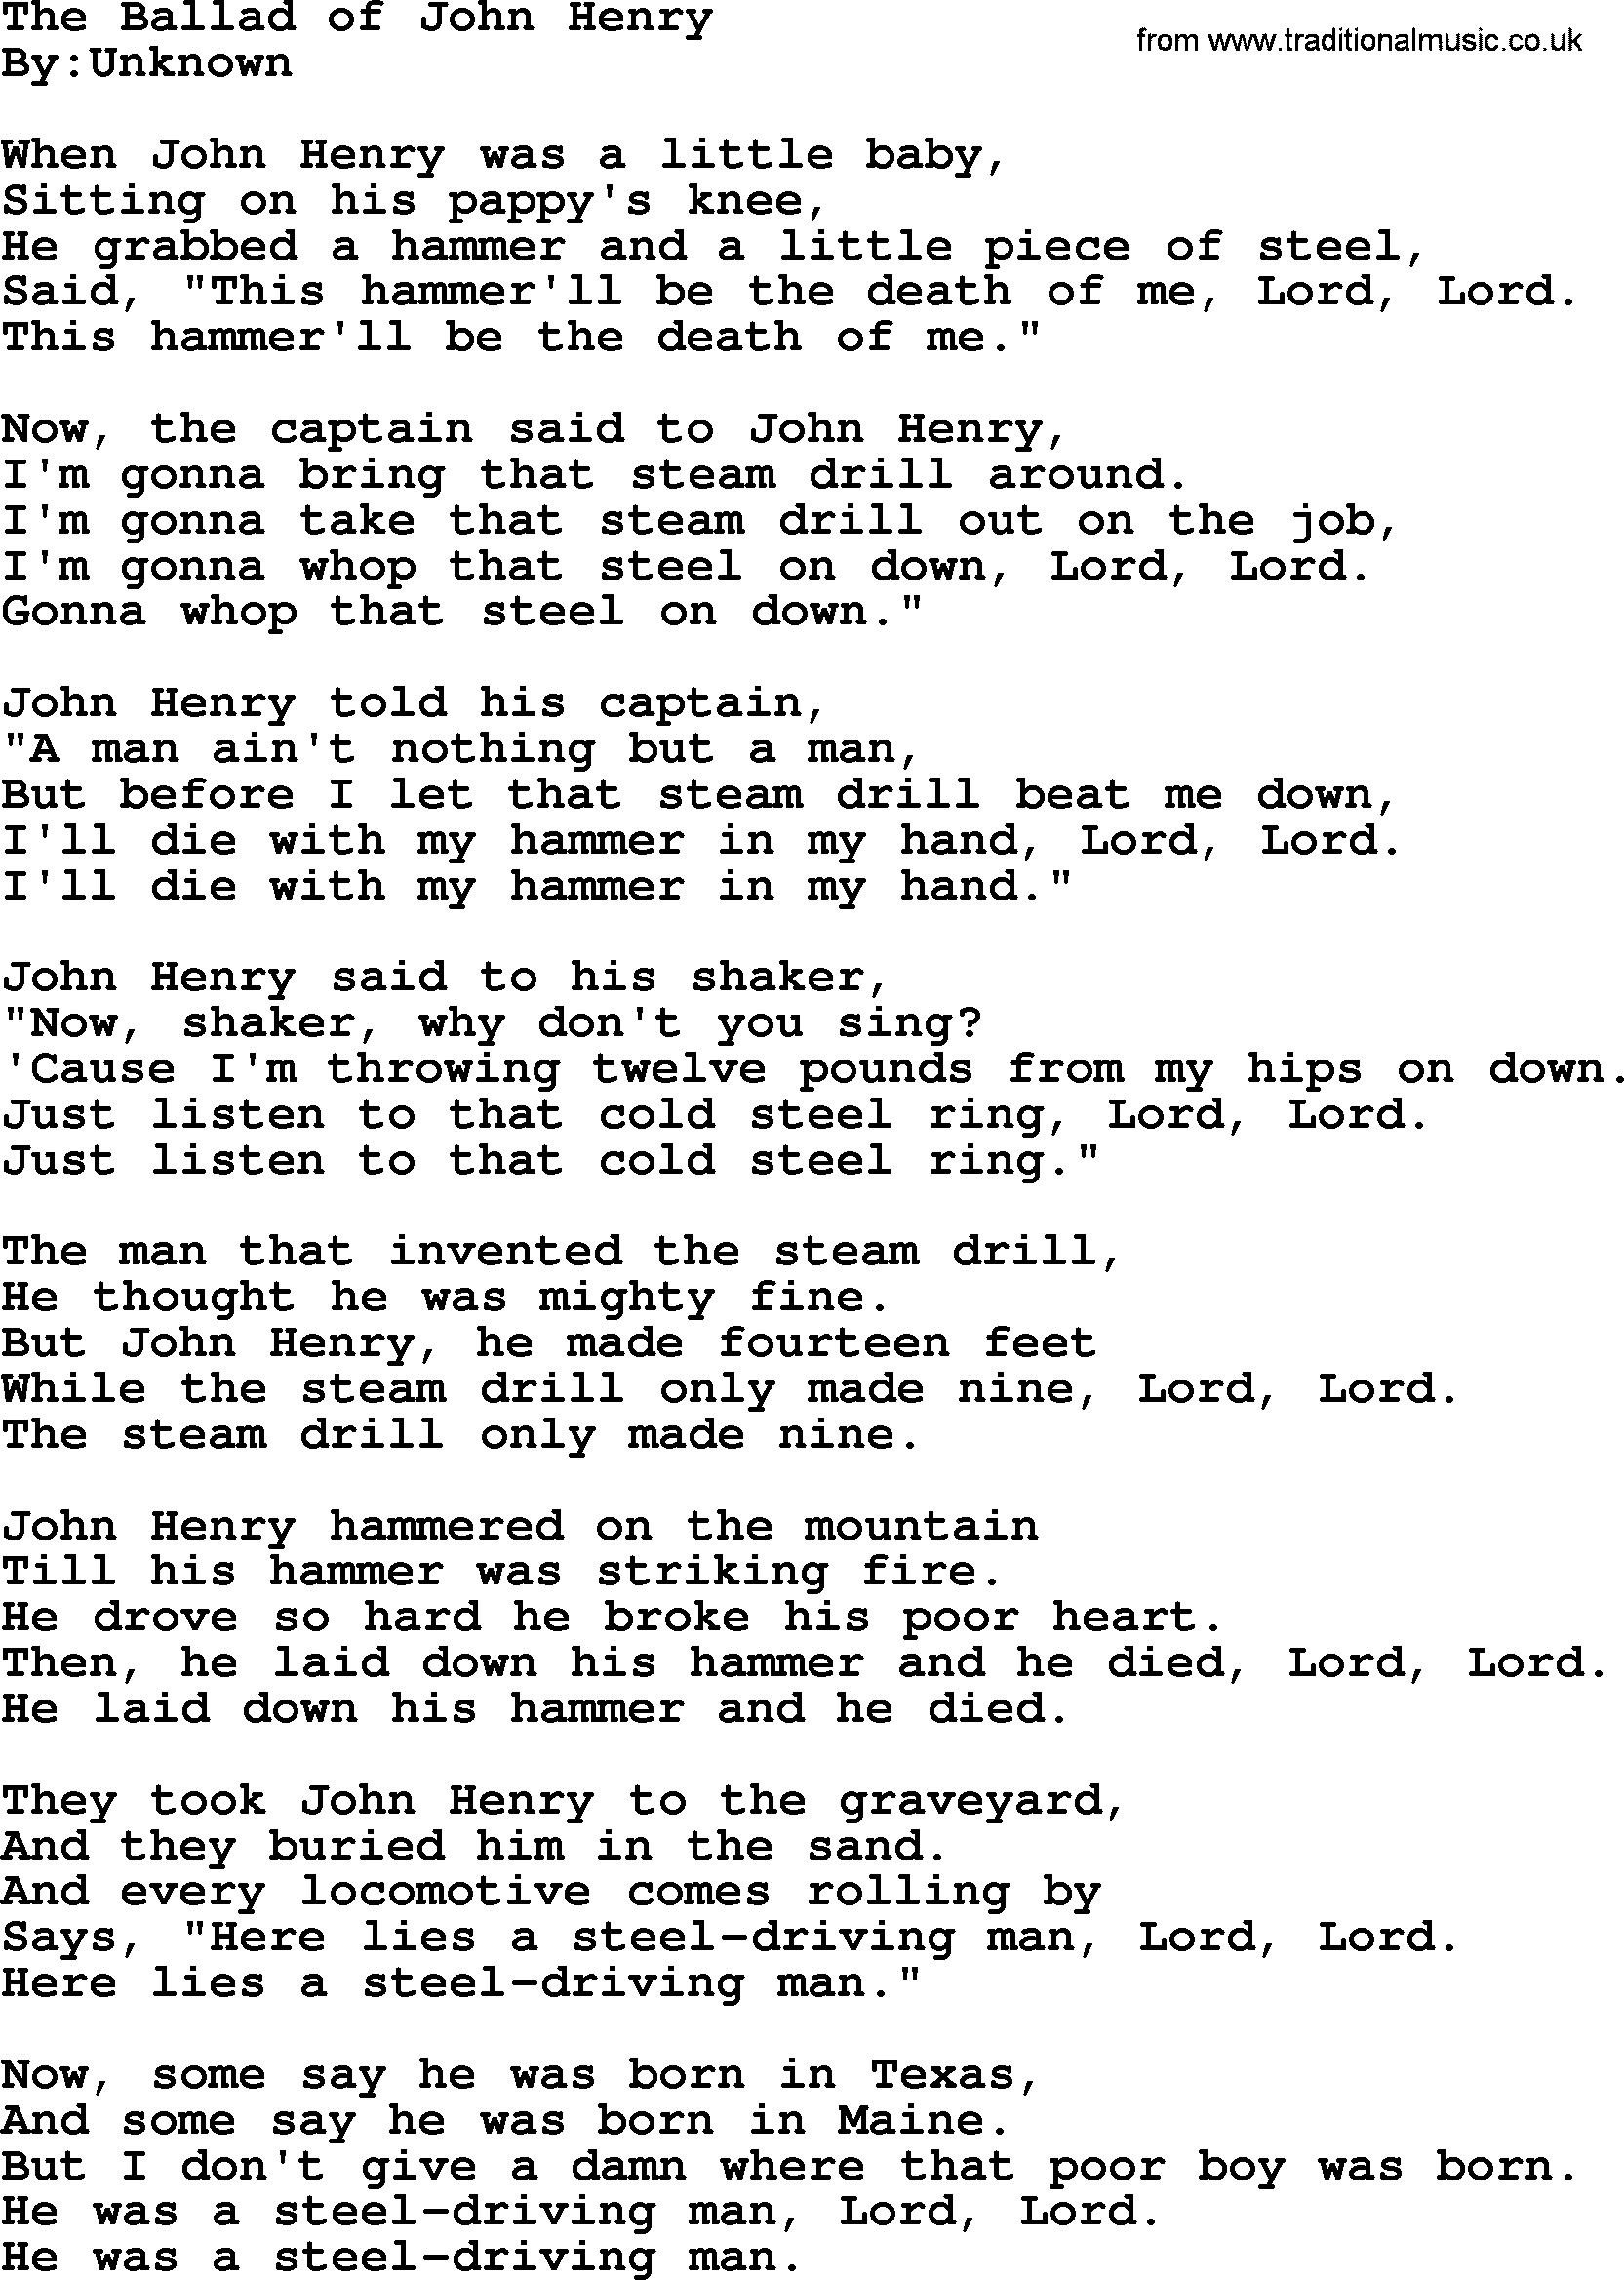 Political, Solidarity, Workers or Union song: The Ballad Of John Henry, lyrics